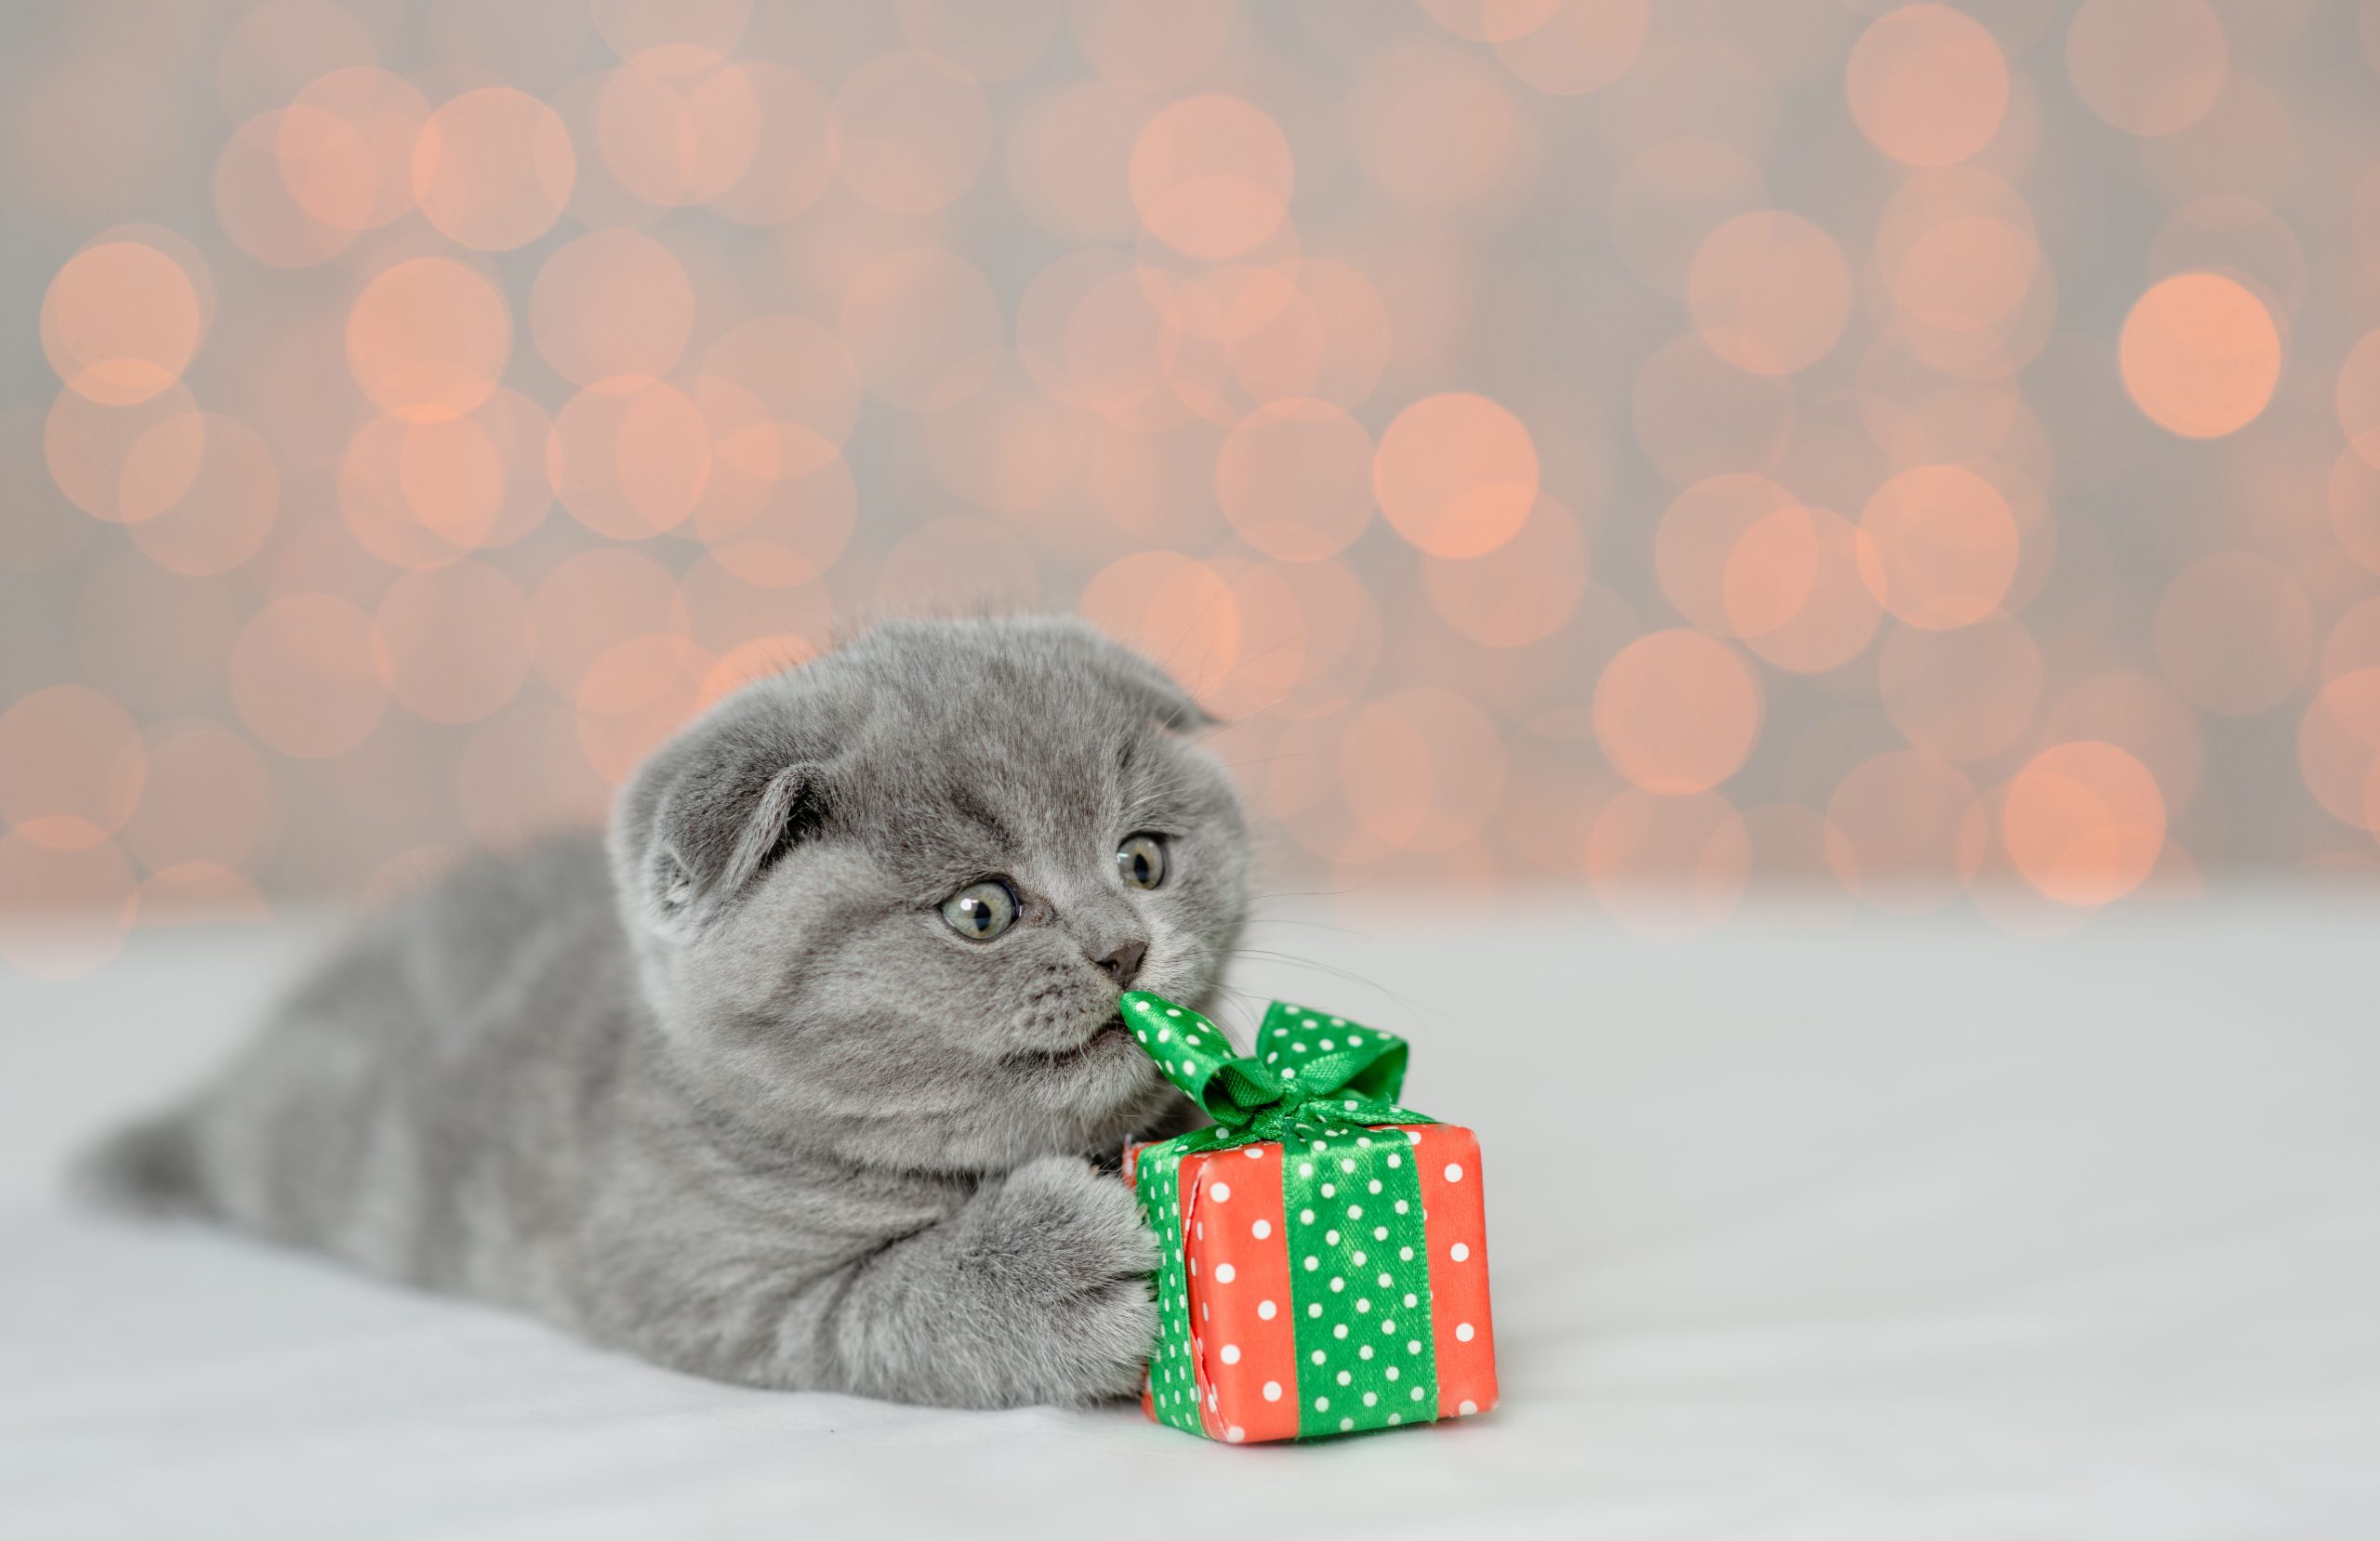 4 Pet Christmas Presents Ideas That Your Fur Baby will LOVE